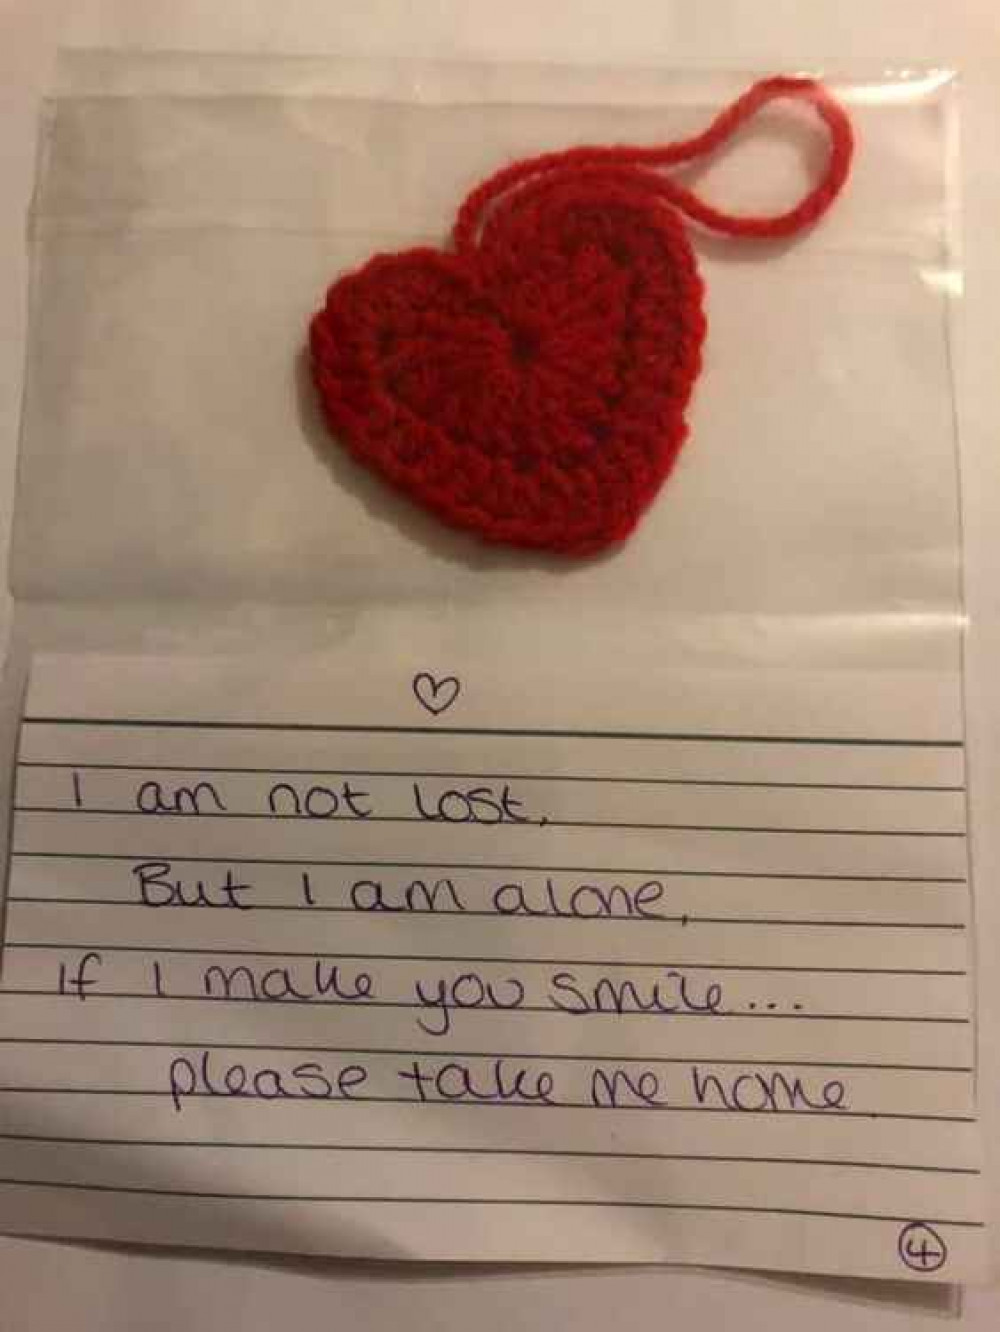 The message and crochet heart Sarah found on Saturday